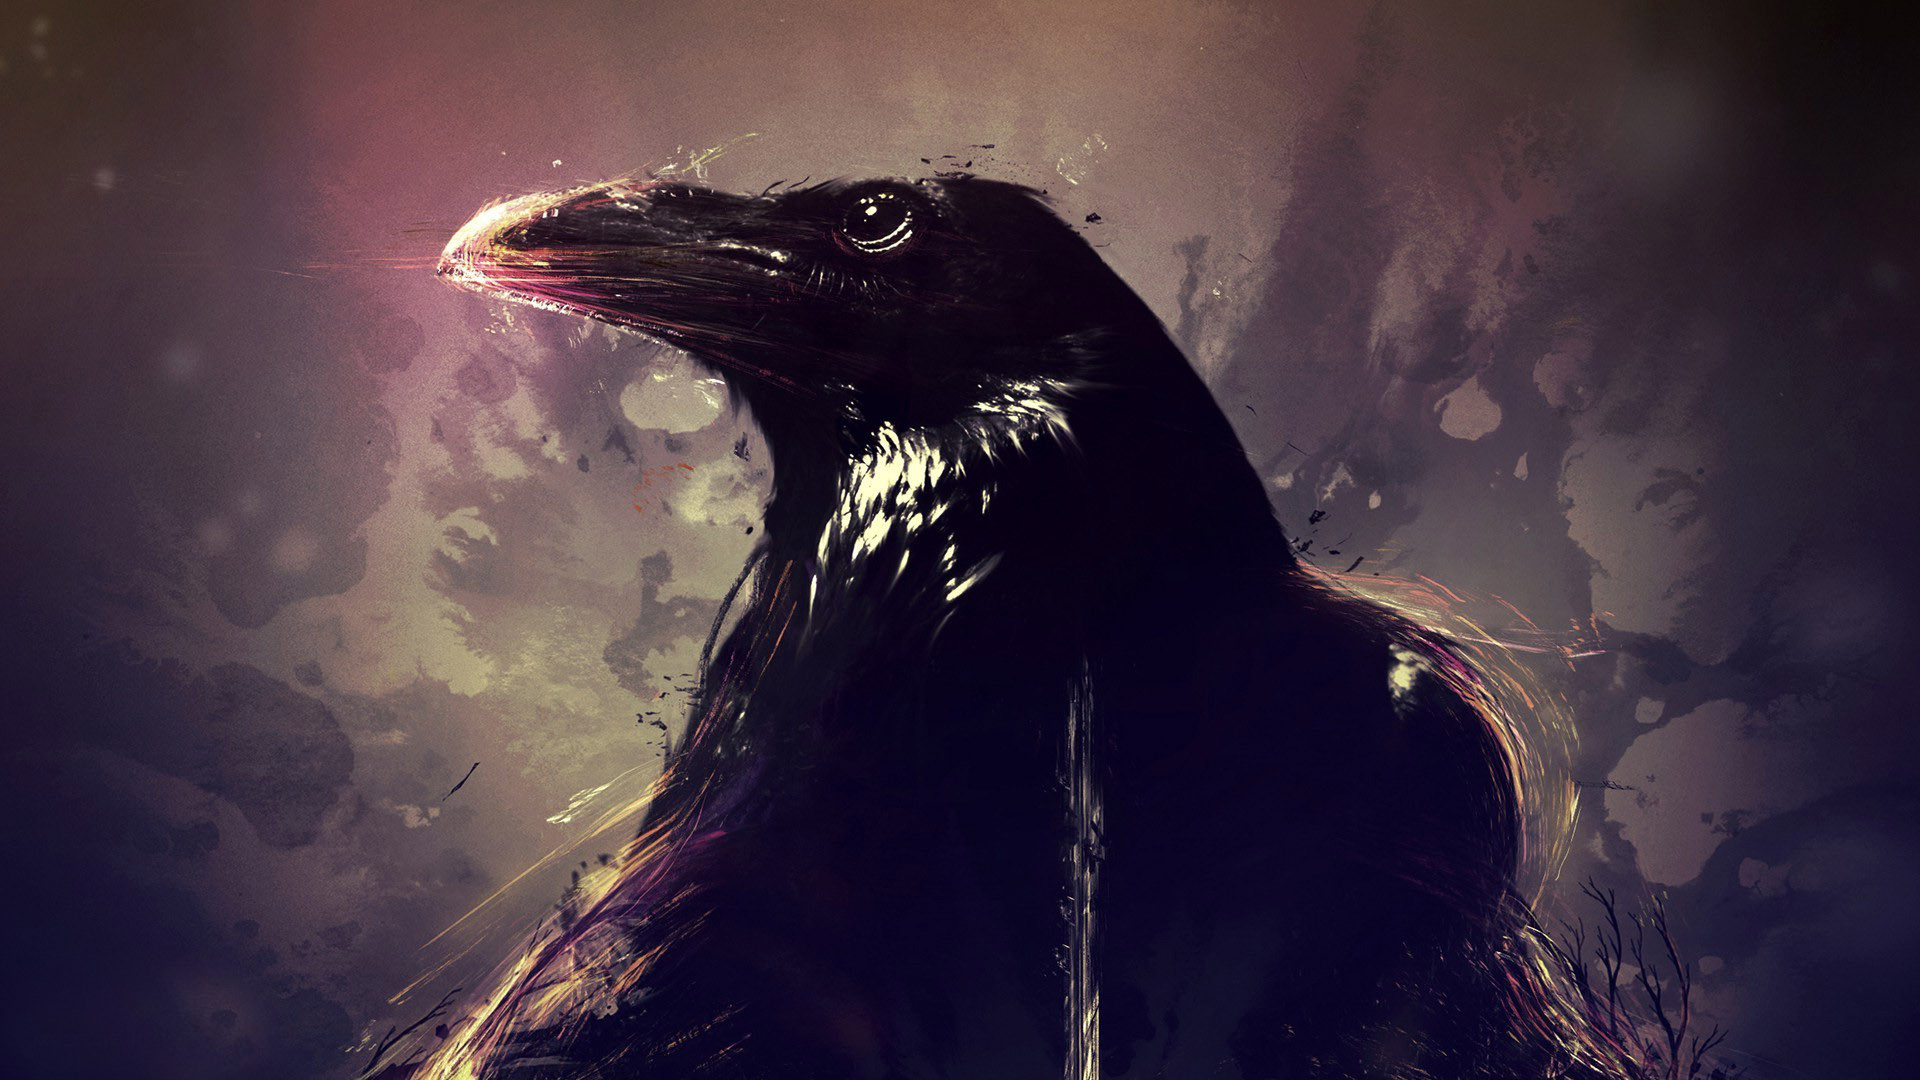 1920x1080 Full HD Wallpapers Crow 0.35 Mb